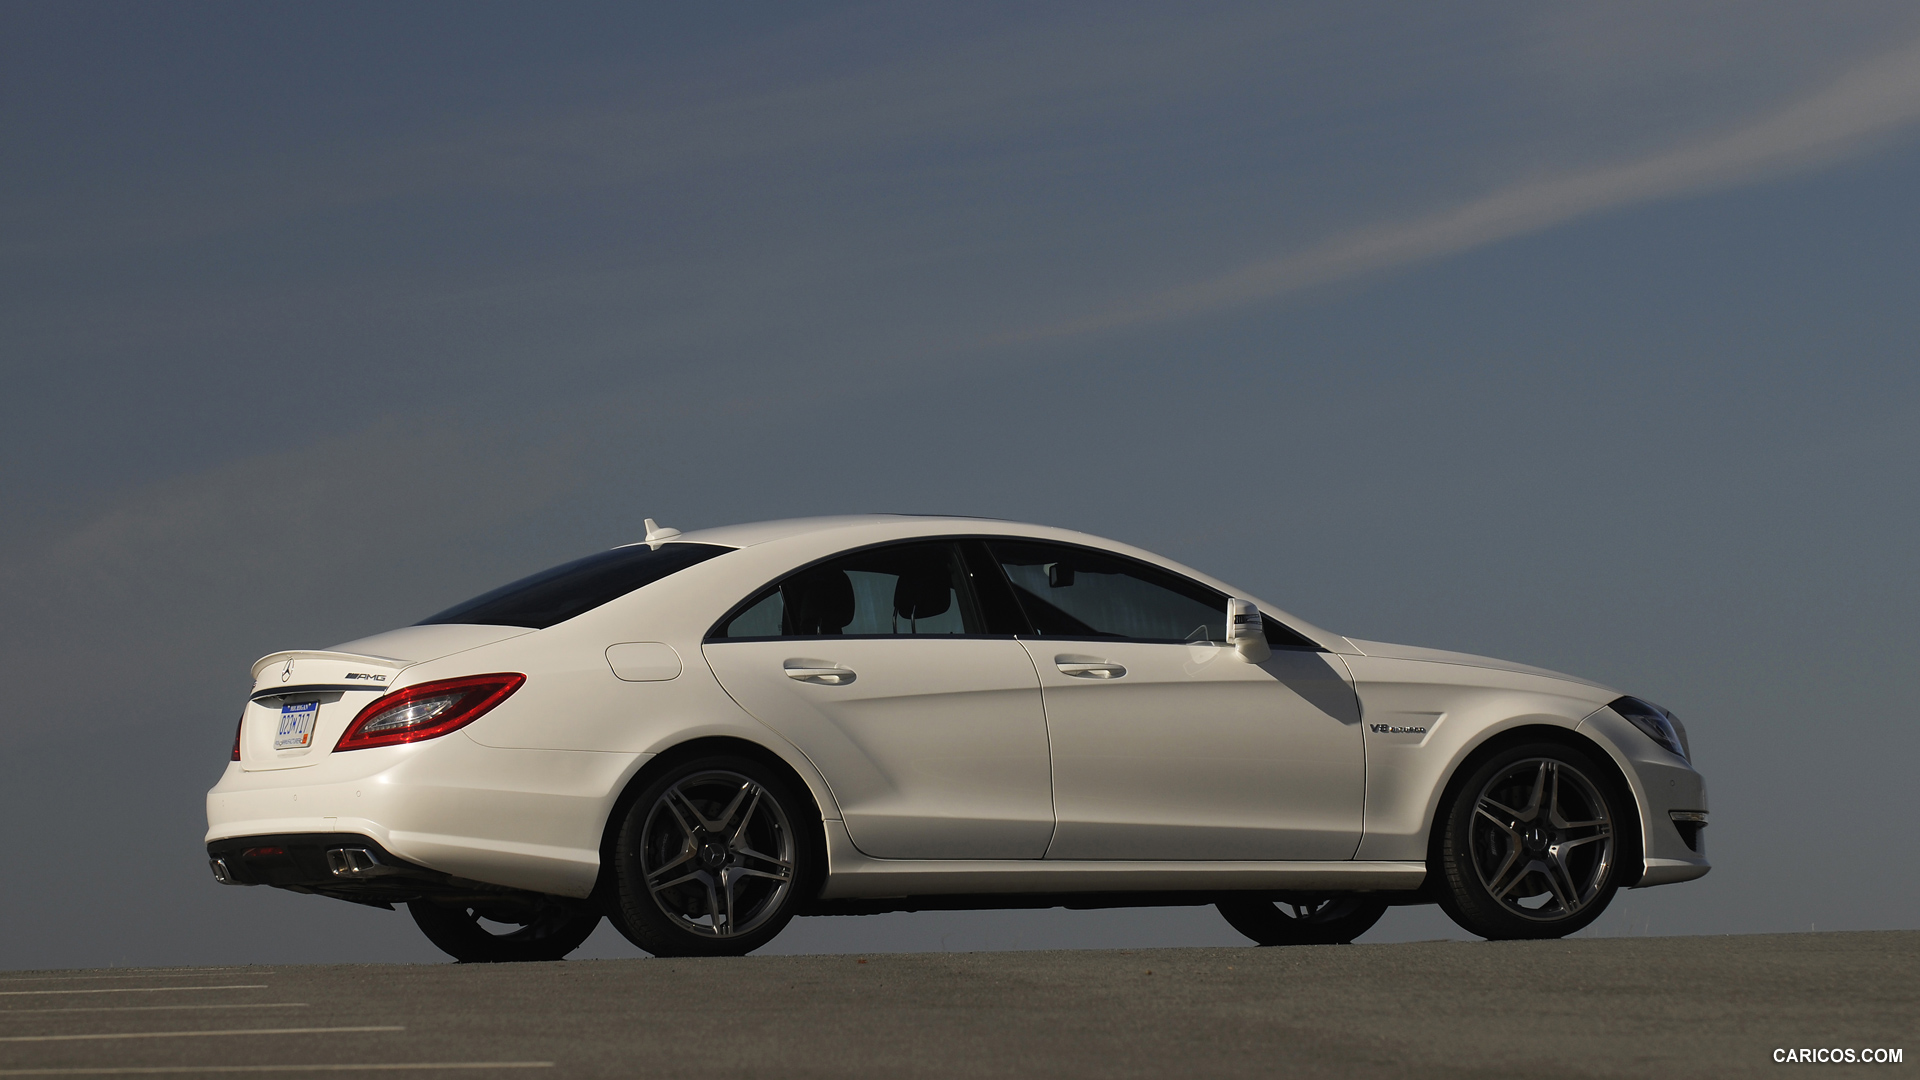 Mercedes-Benz CLS63 AMG (2012) US-Version - Diamond White - Side, #20 of 100